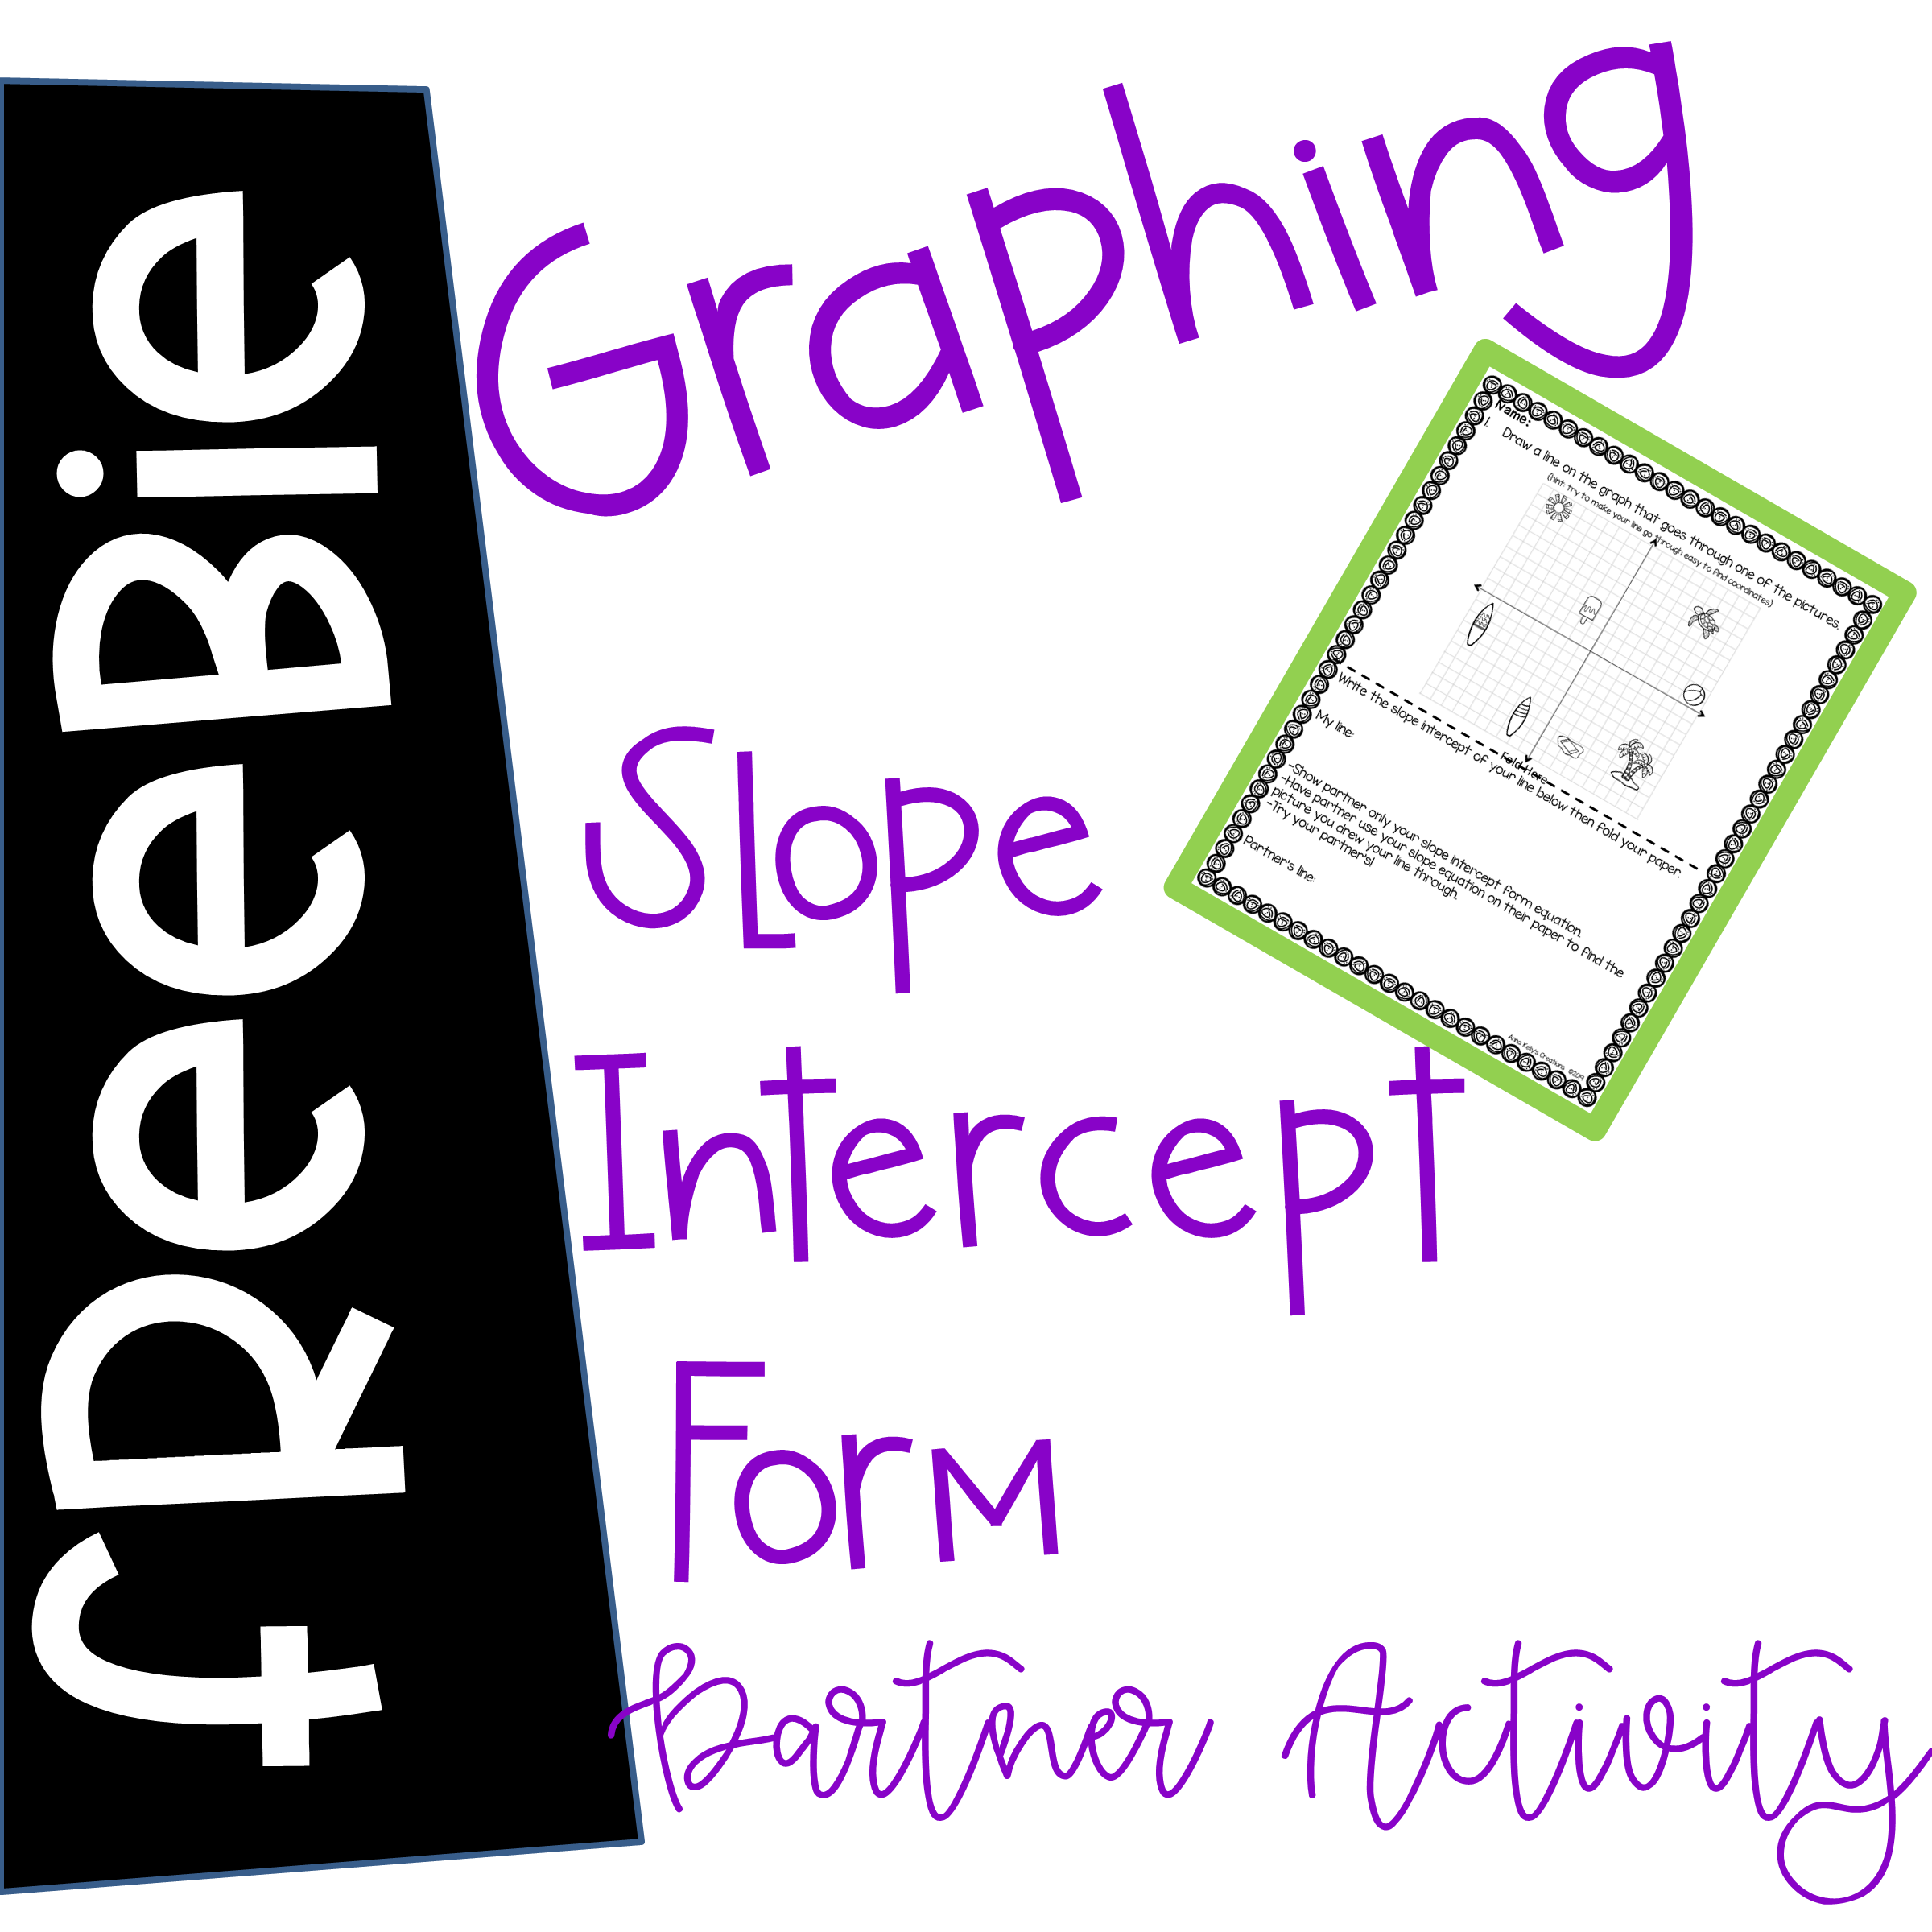 Graphing Slope Intercept Form Activities - Anna Kelly